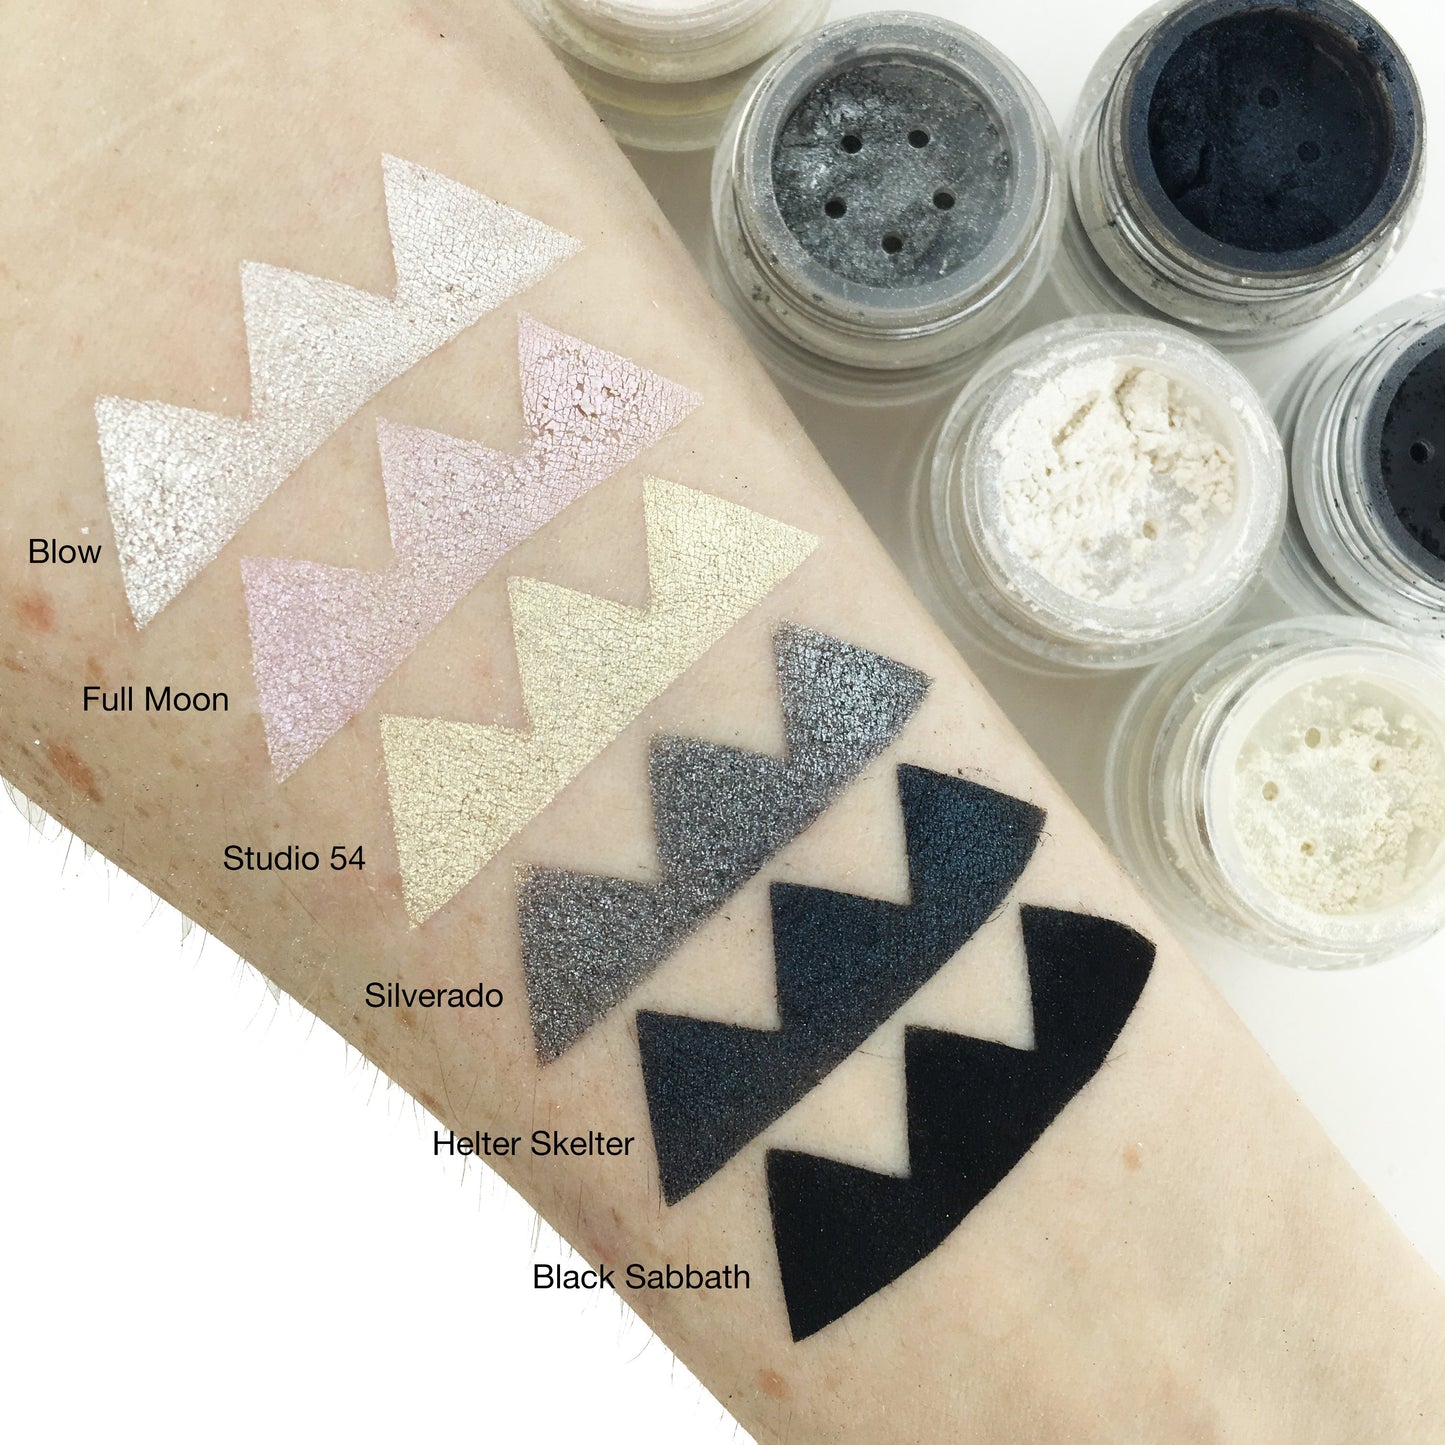 Swatches Eye Dust - Helter Skelter